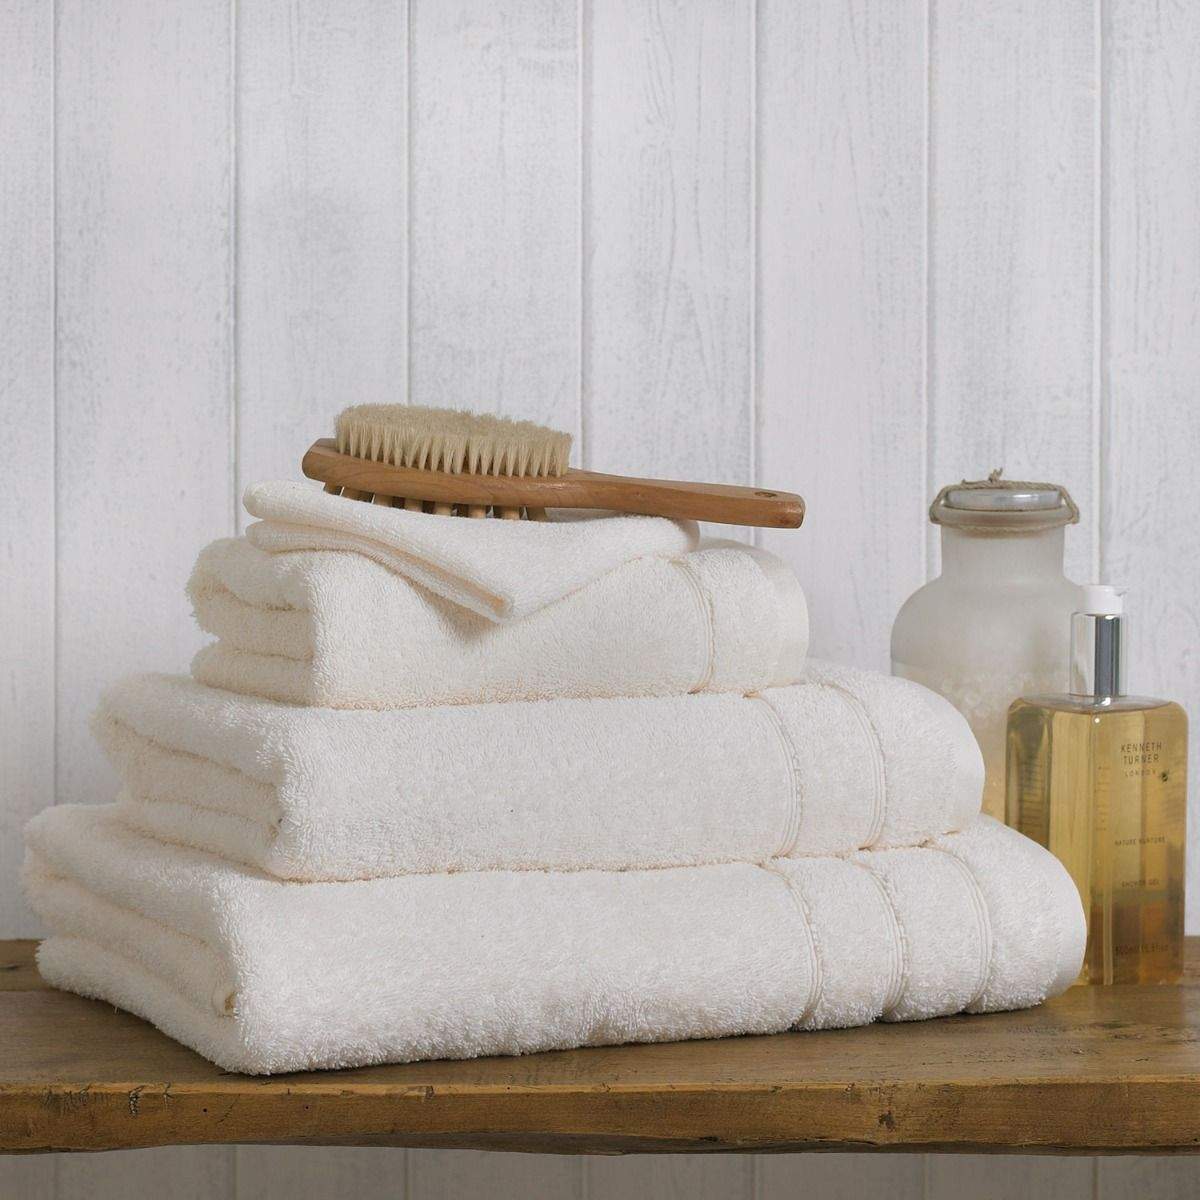 ULTRA SOFT AND HIGHLY ABSORBENT HOTEL QUALITY BATH LINEN PREMIUM 100% NATURAL COTTON TOWELS FOR SPA HOTEL AND HOME PACK OF 2 Bed and Bath Linen